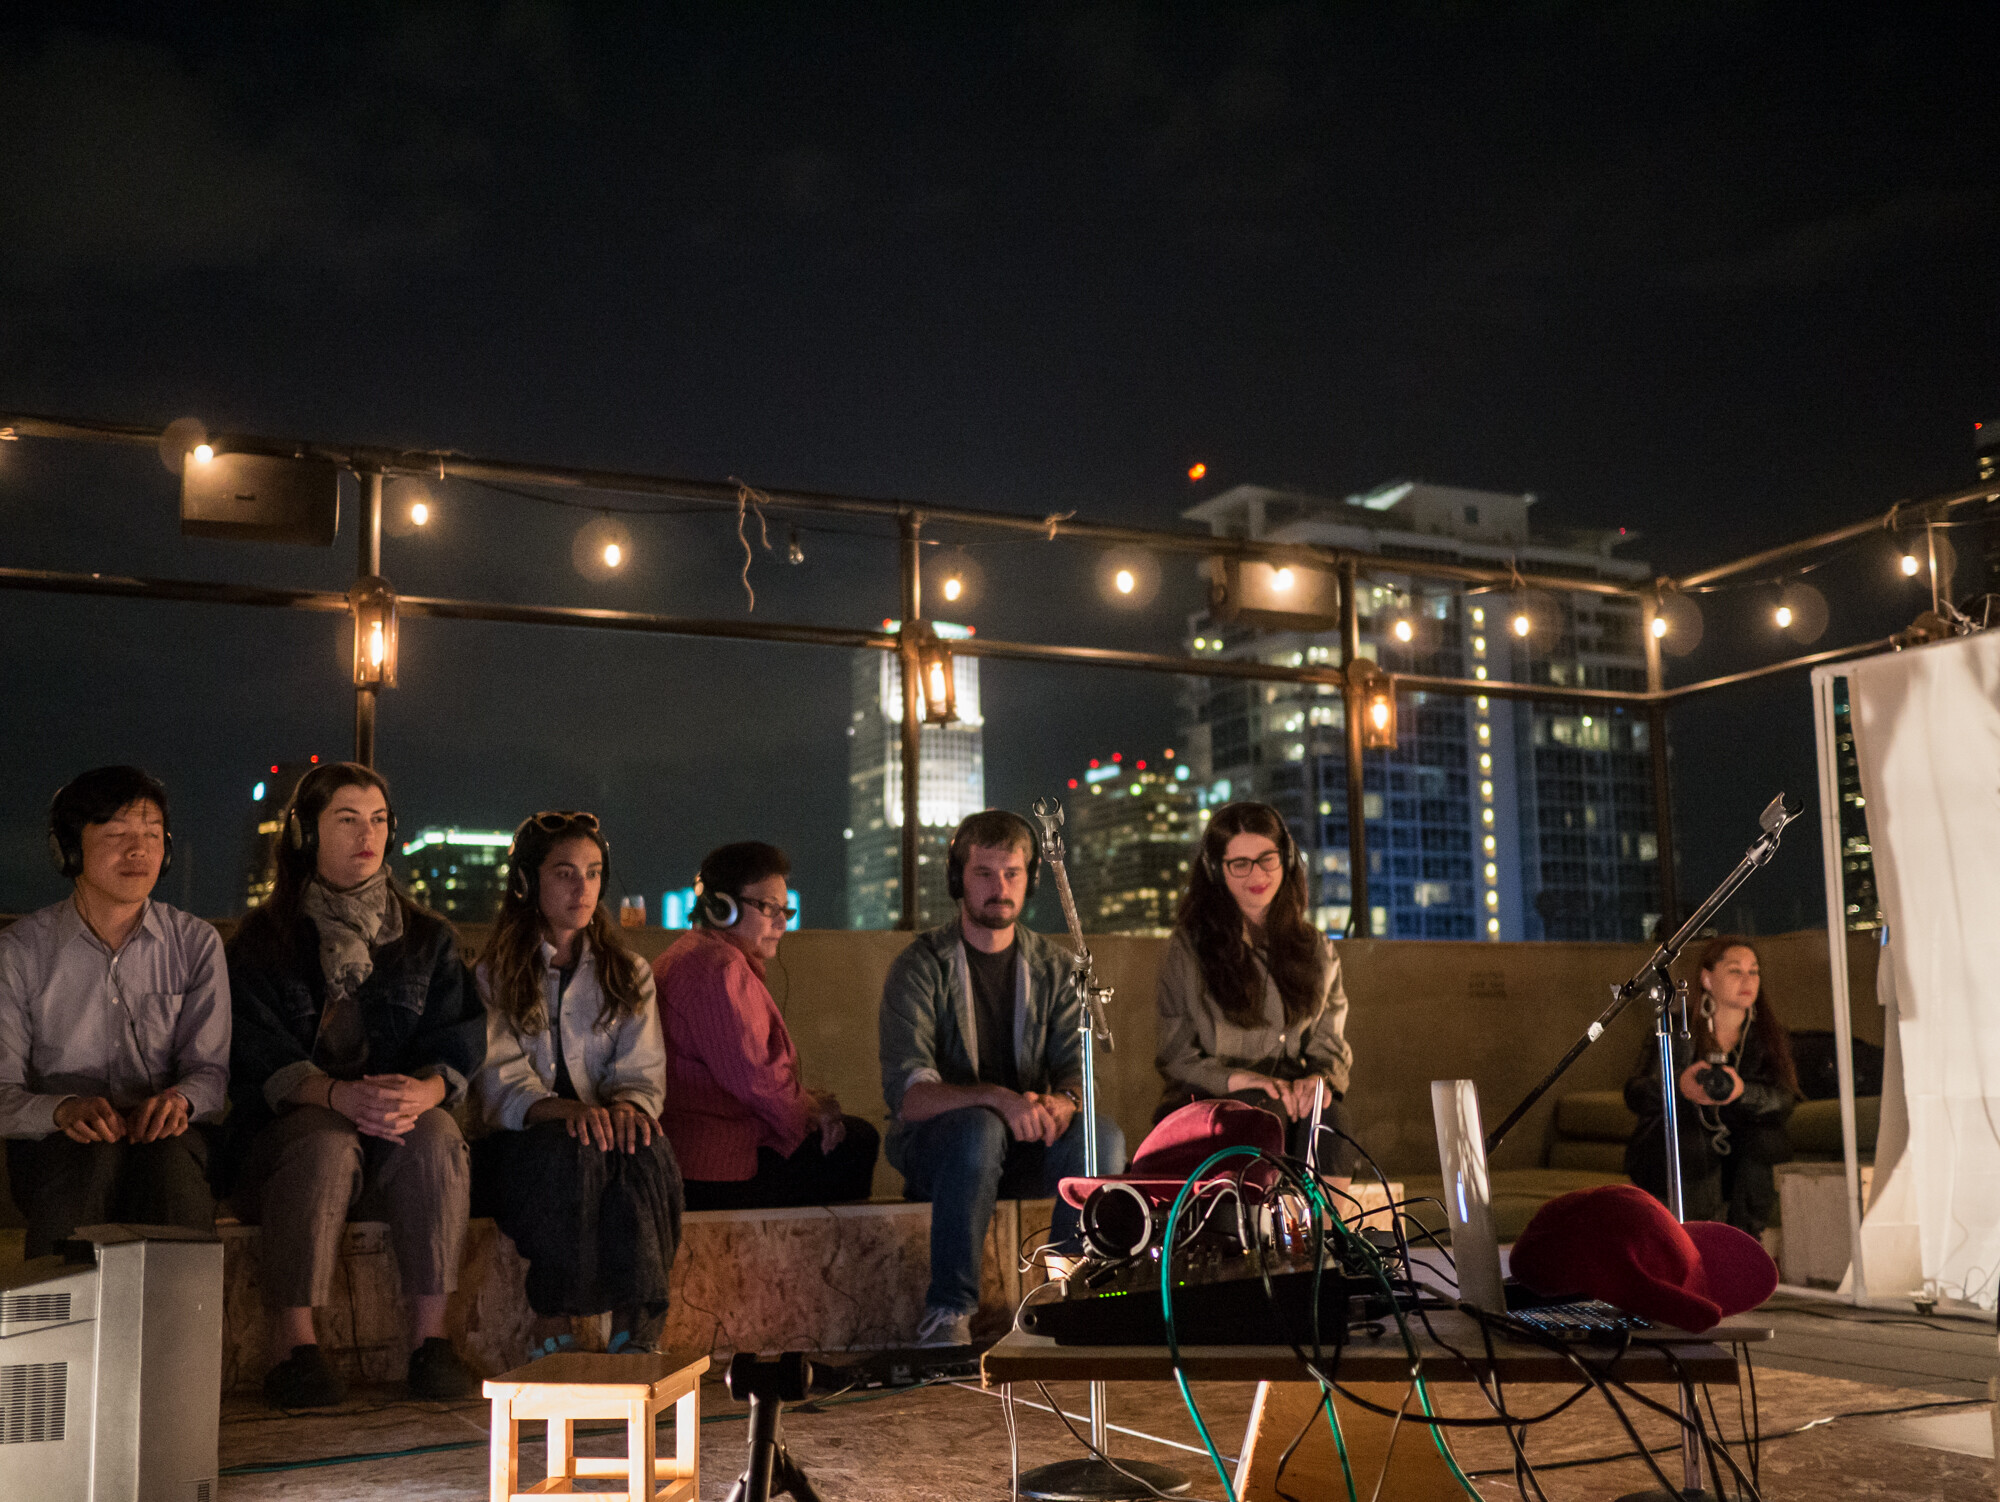 Seven people sitting on a lit-up rooftop.